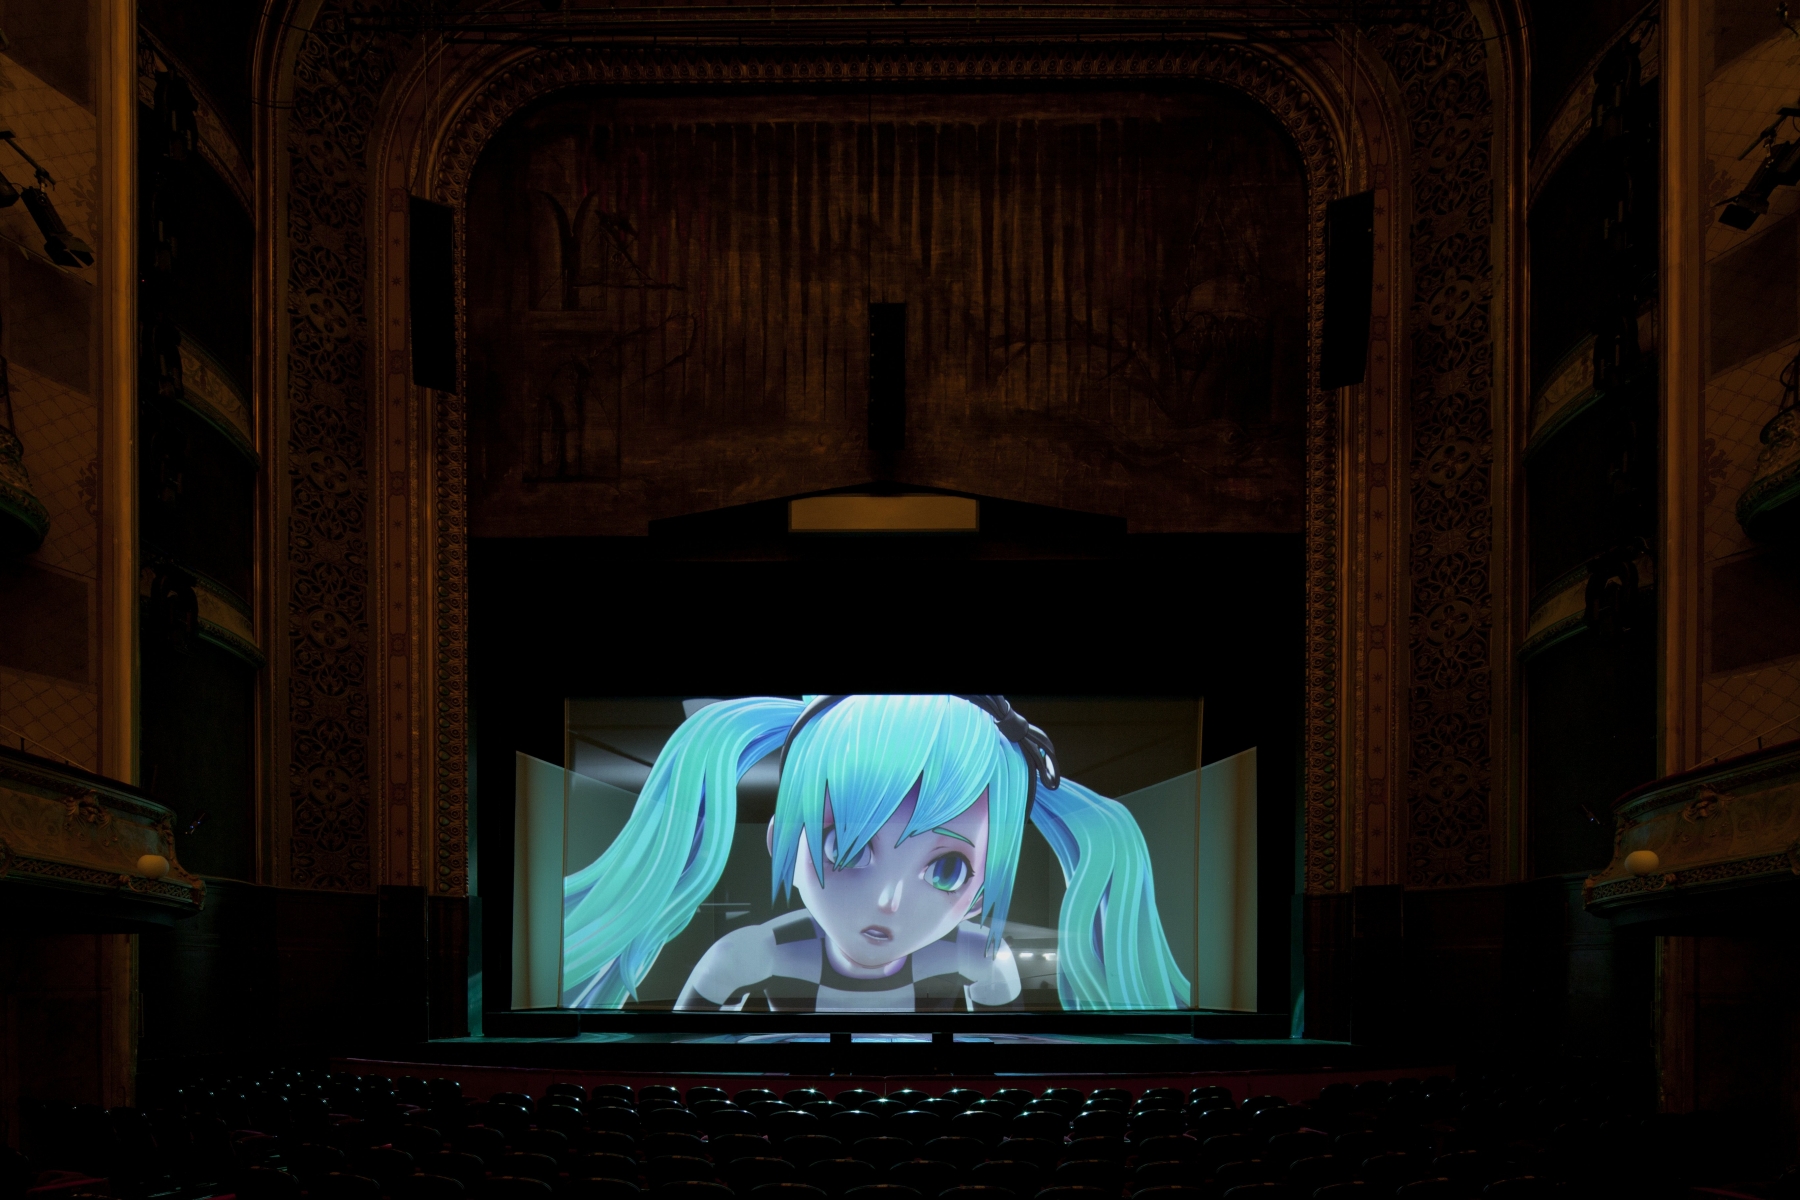 Hatsune Miku’s Vocaloid Opera “THE END” by Shibuya Keiichiro, to be Performed at Amsterdam!